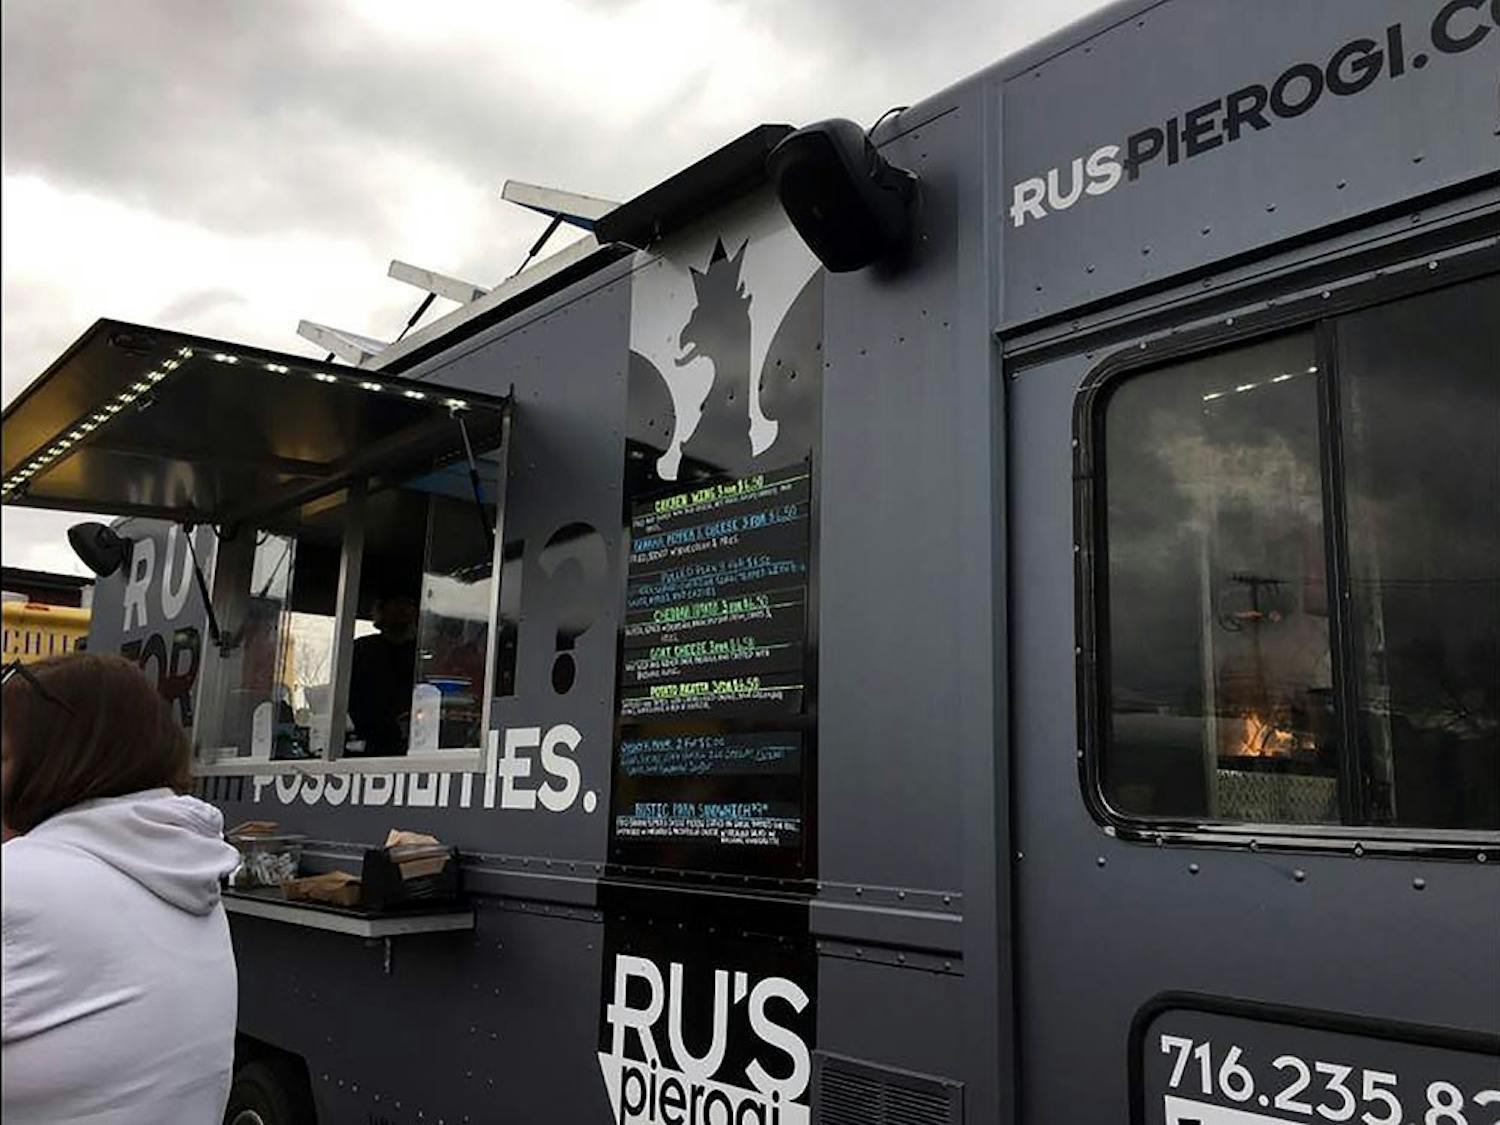 Ru’s Pierogi food truck against an ominous sky. The Ru’s truck is one of the new additions in this year’s food truck line-up.